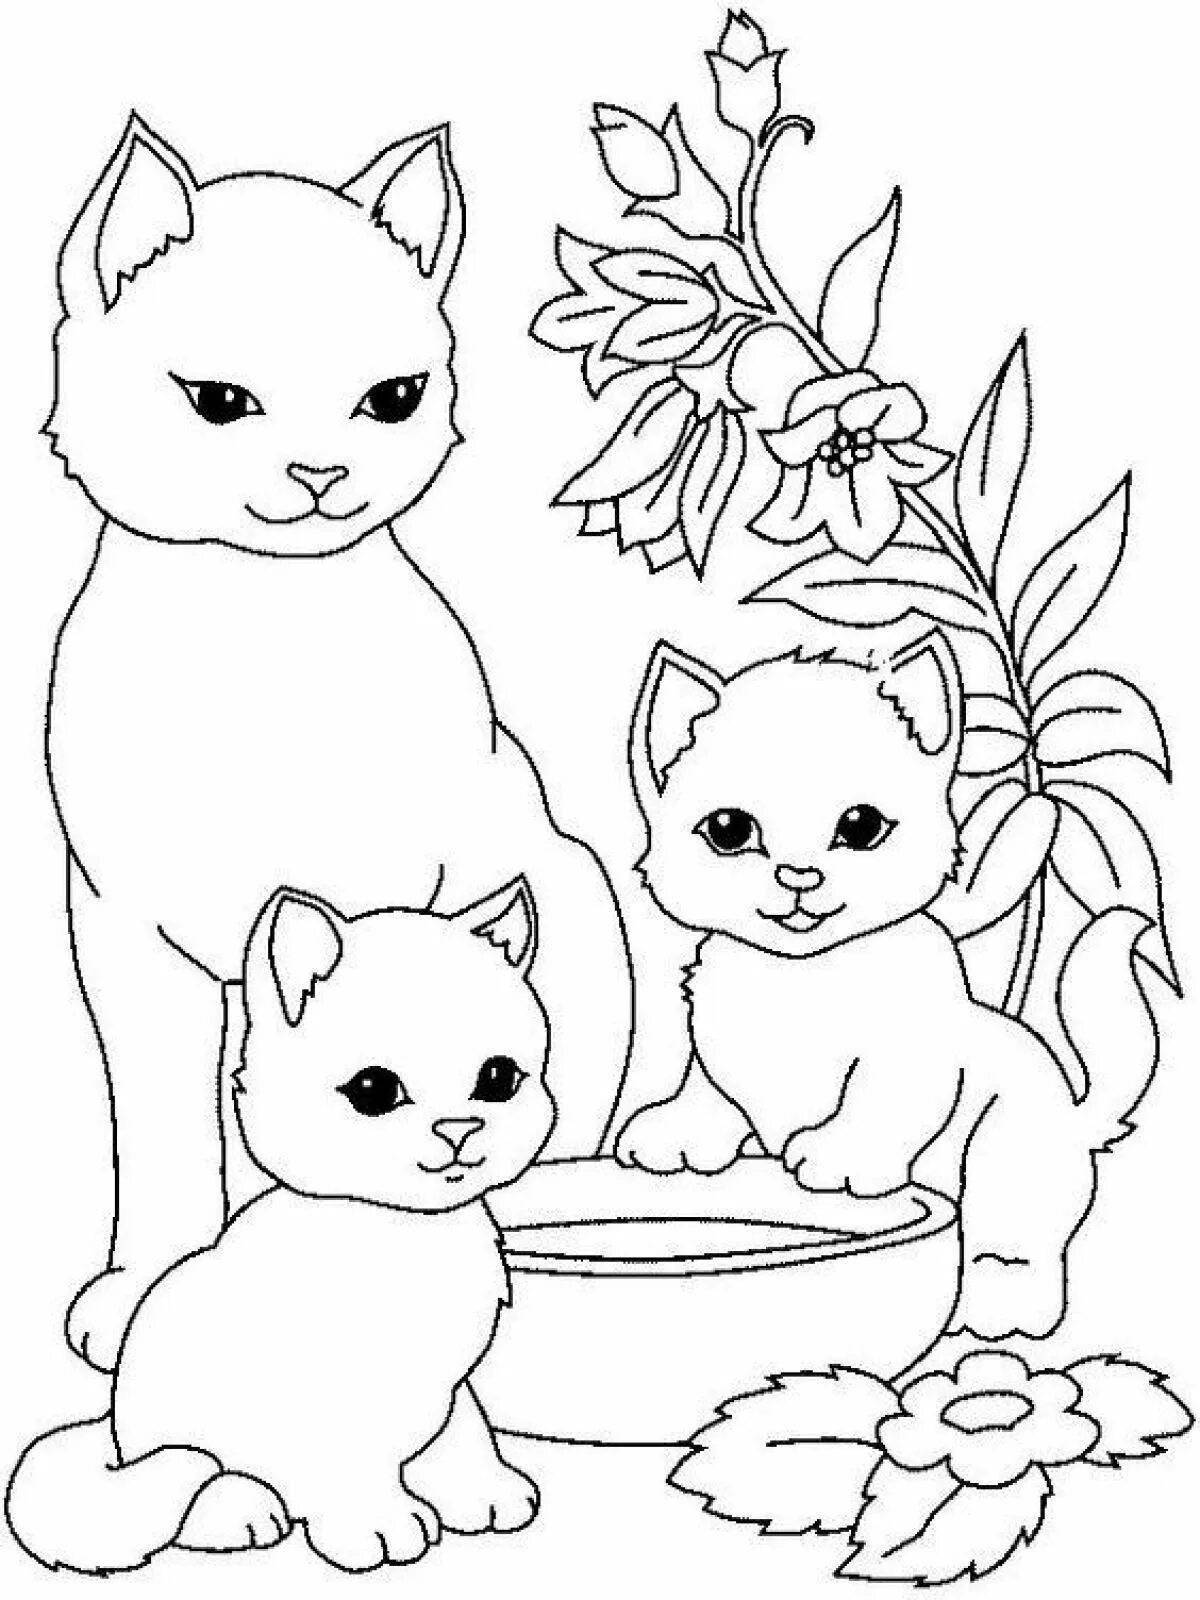 Loving kitten coloring page for 2-3 year olds